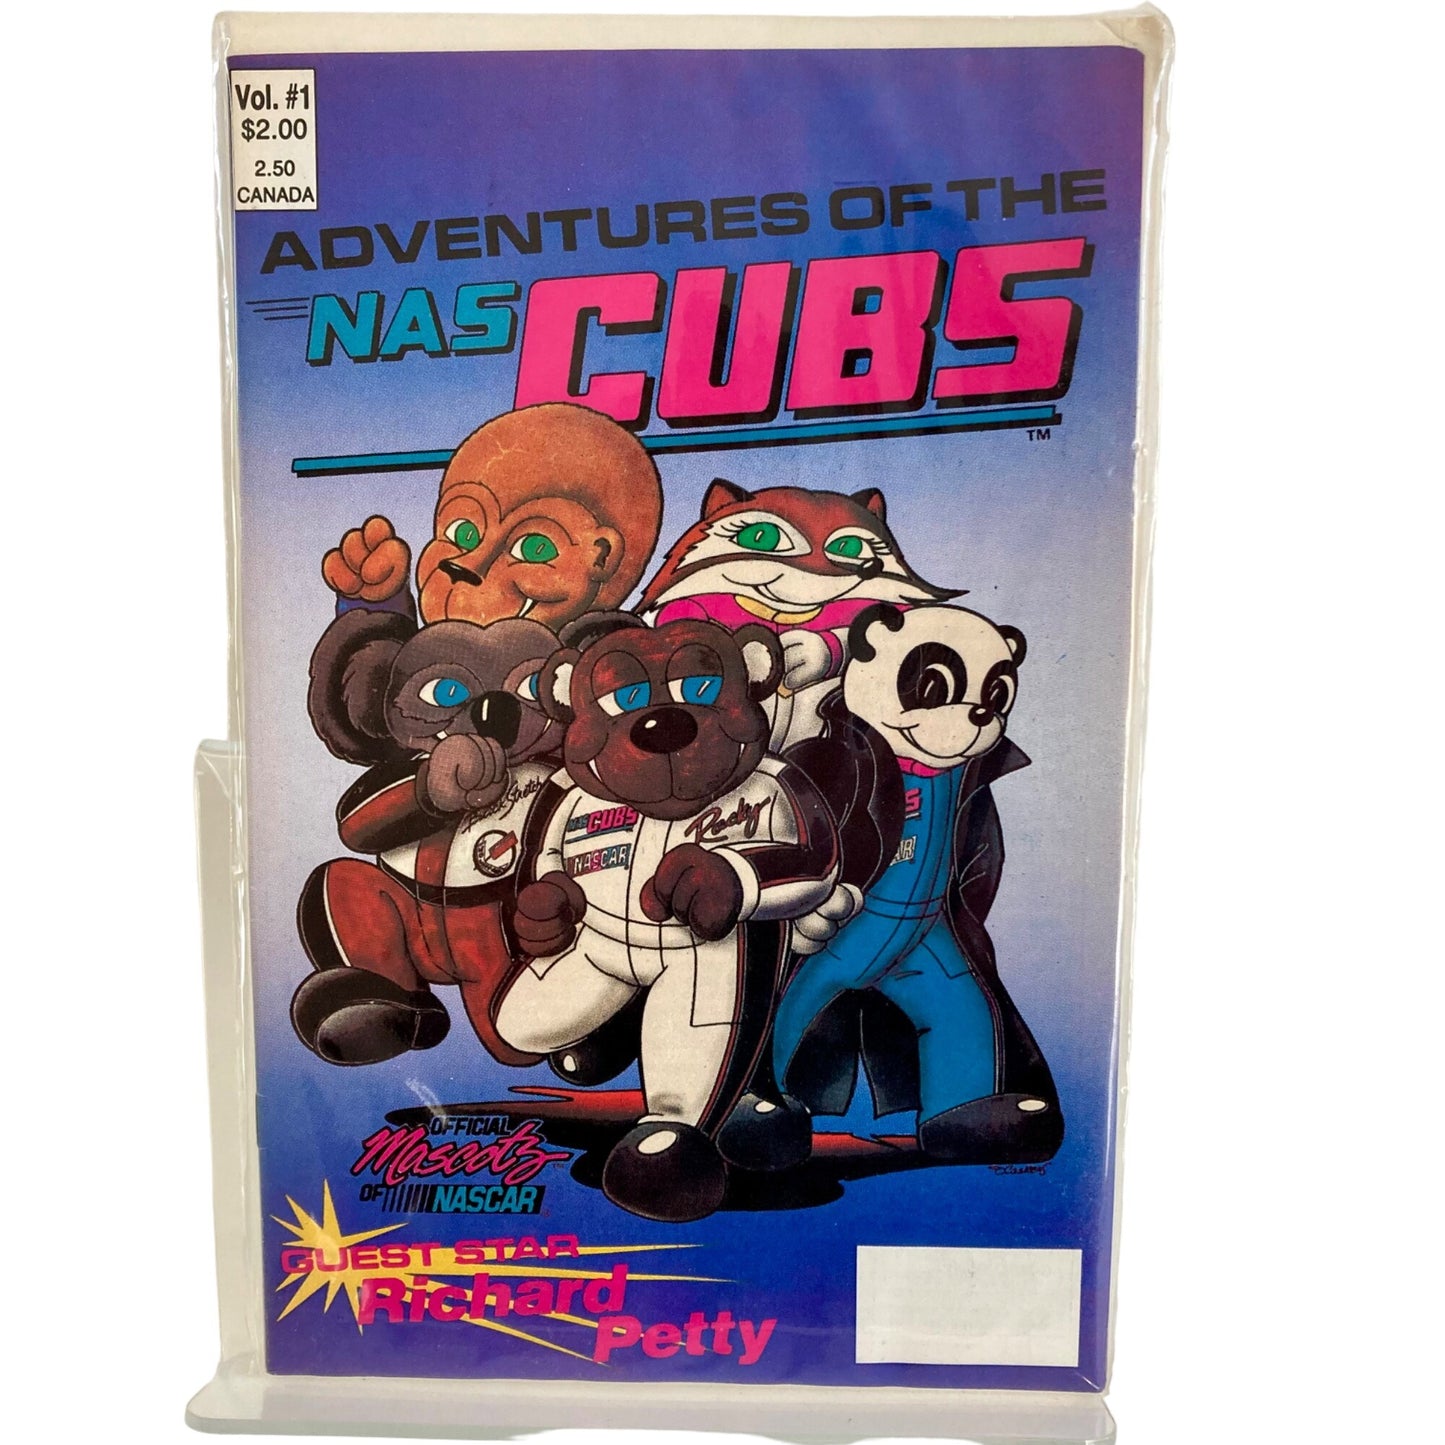 Vintage NASCAR Comic Book "Adventures of the NAS Cubs" Mascots Richard Petty NEW!